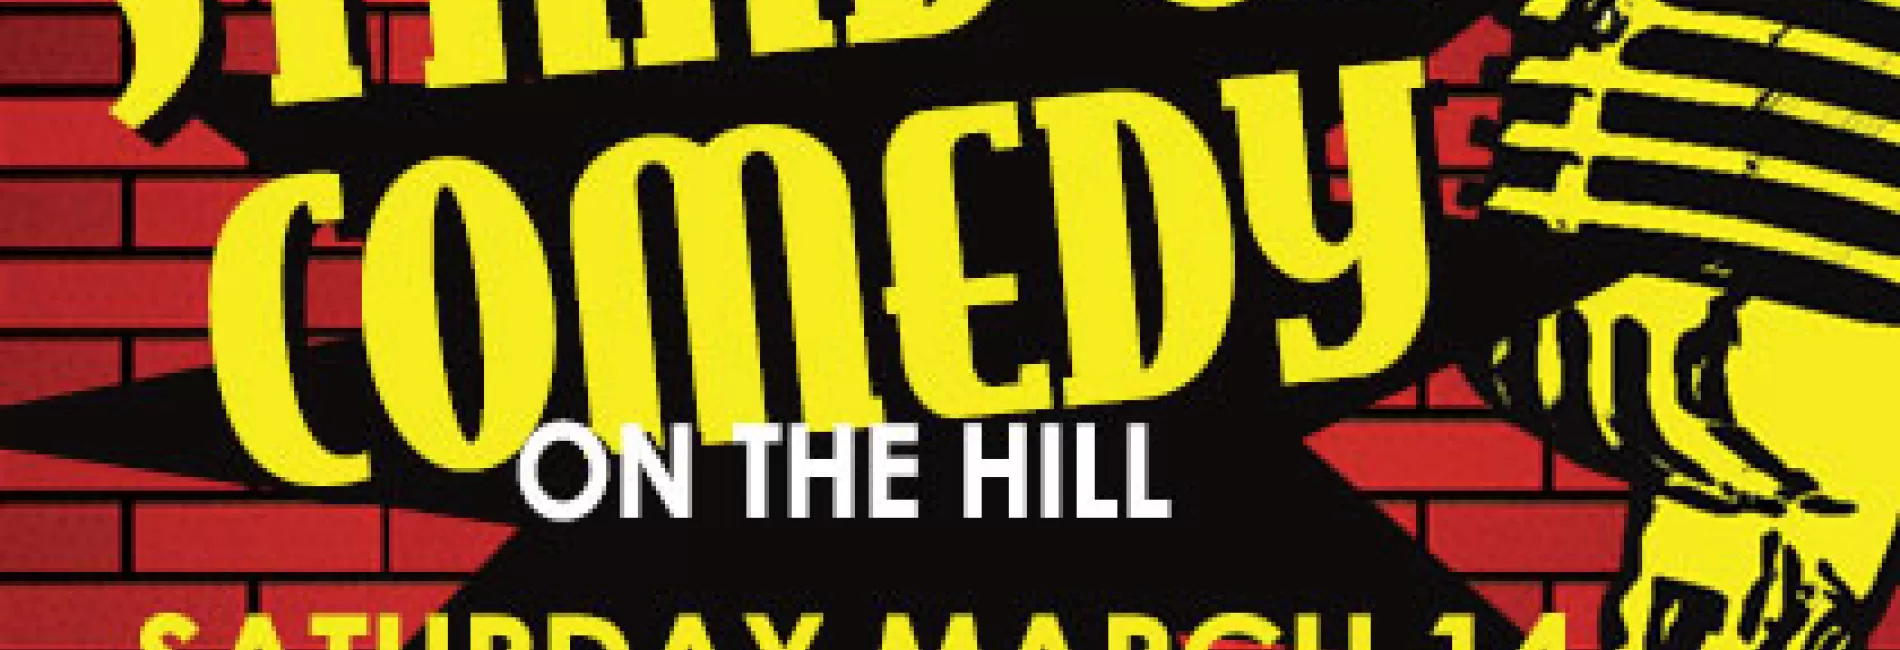 Stand-Up Comedy on the Hill - March